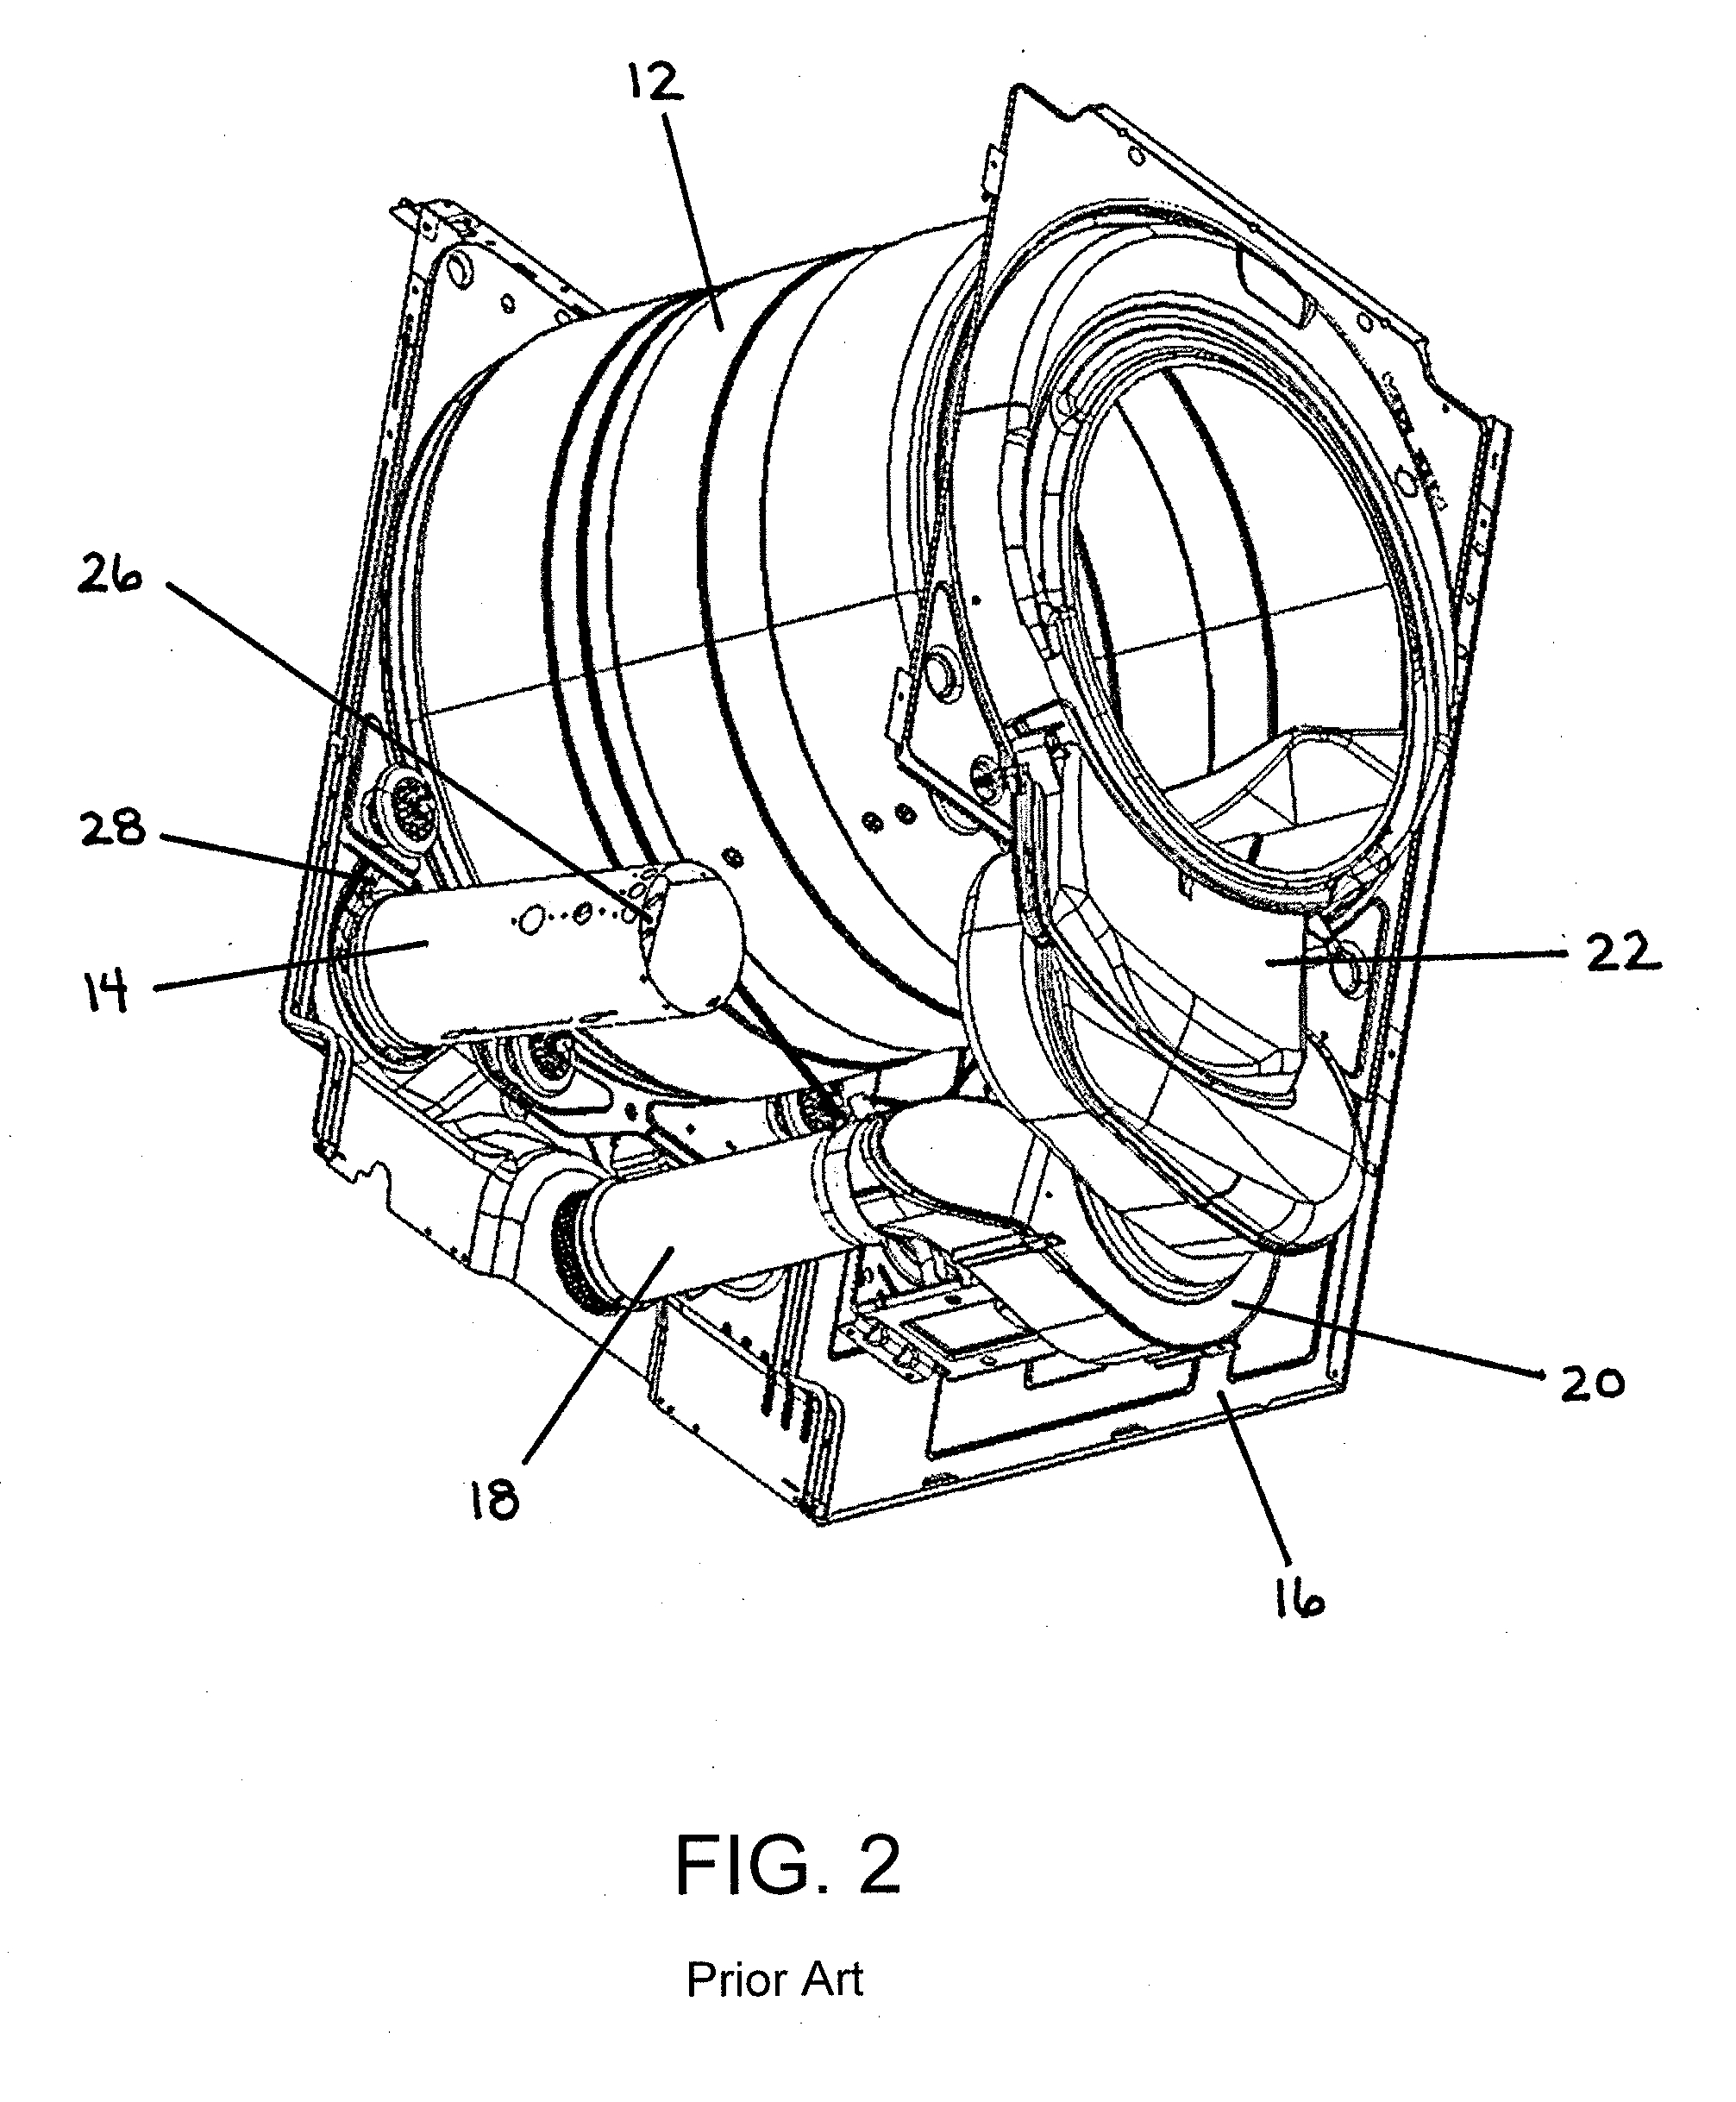 Dryer with Air Recirculation Subassembly